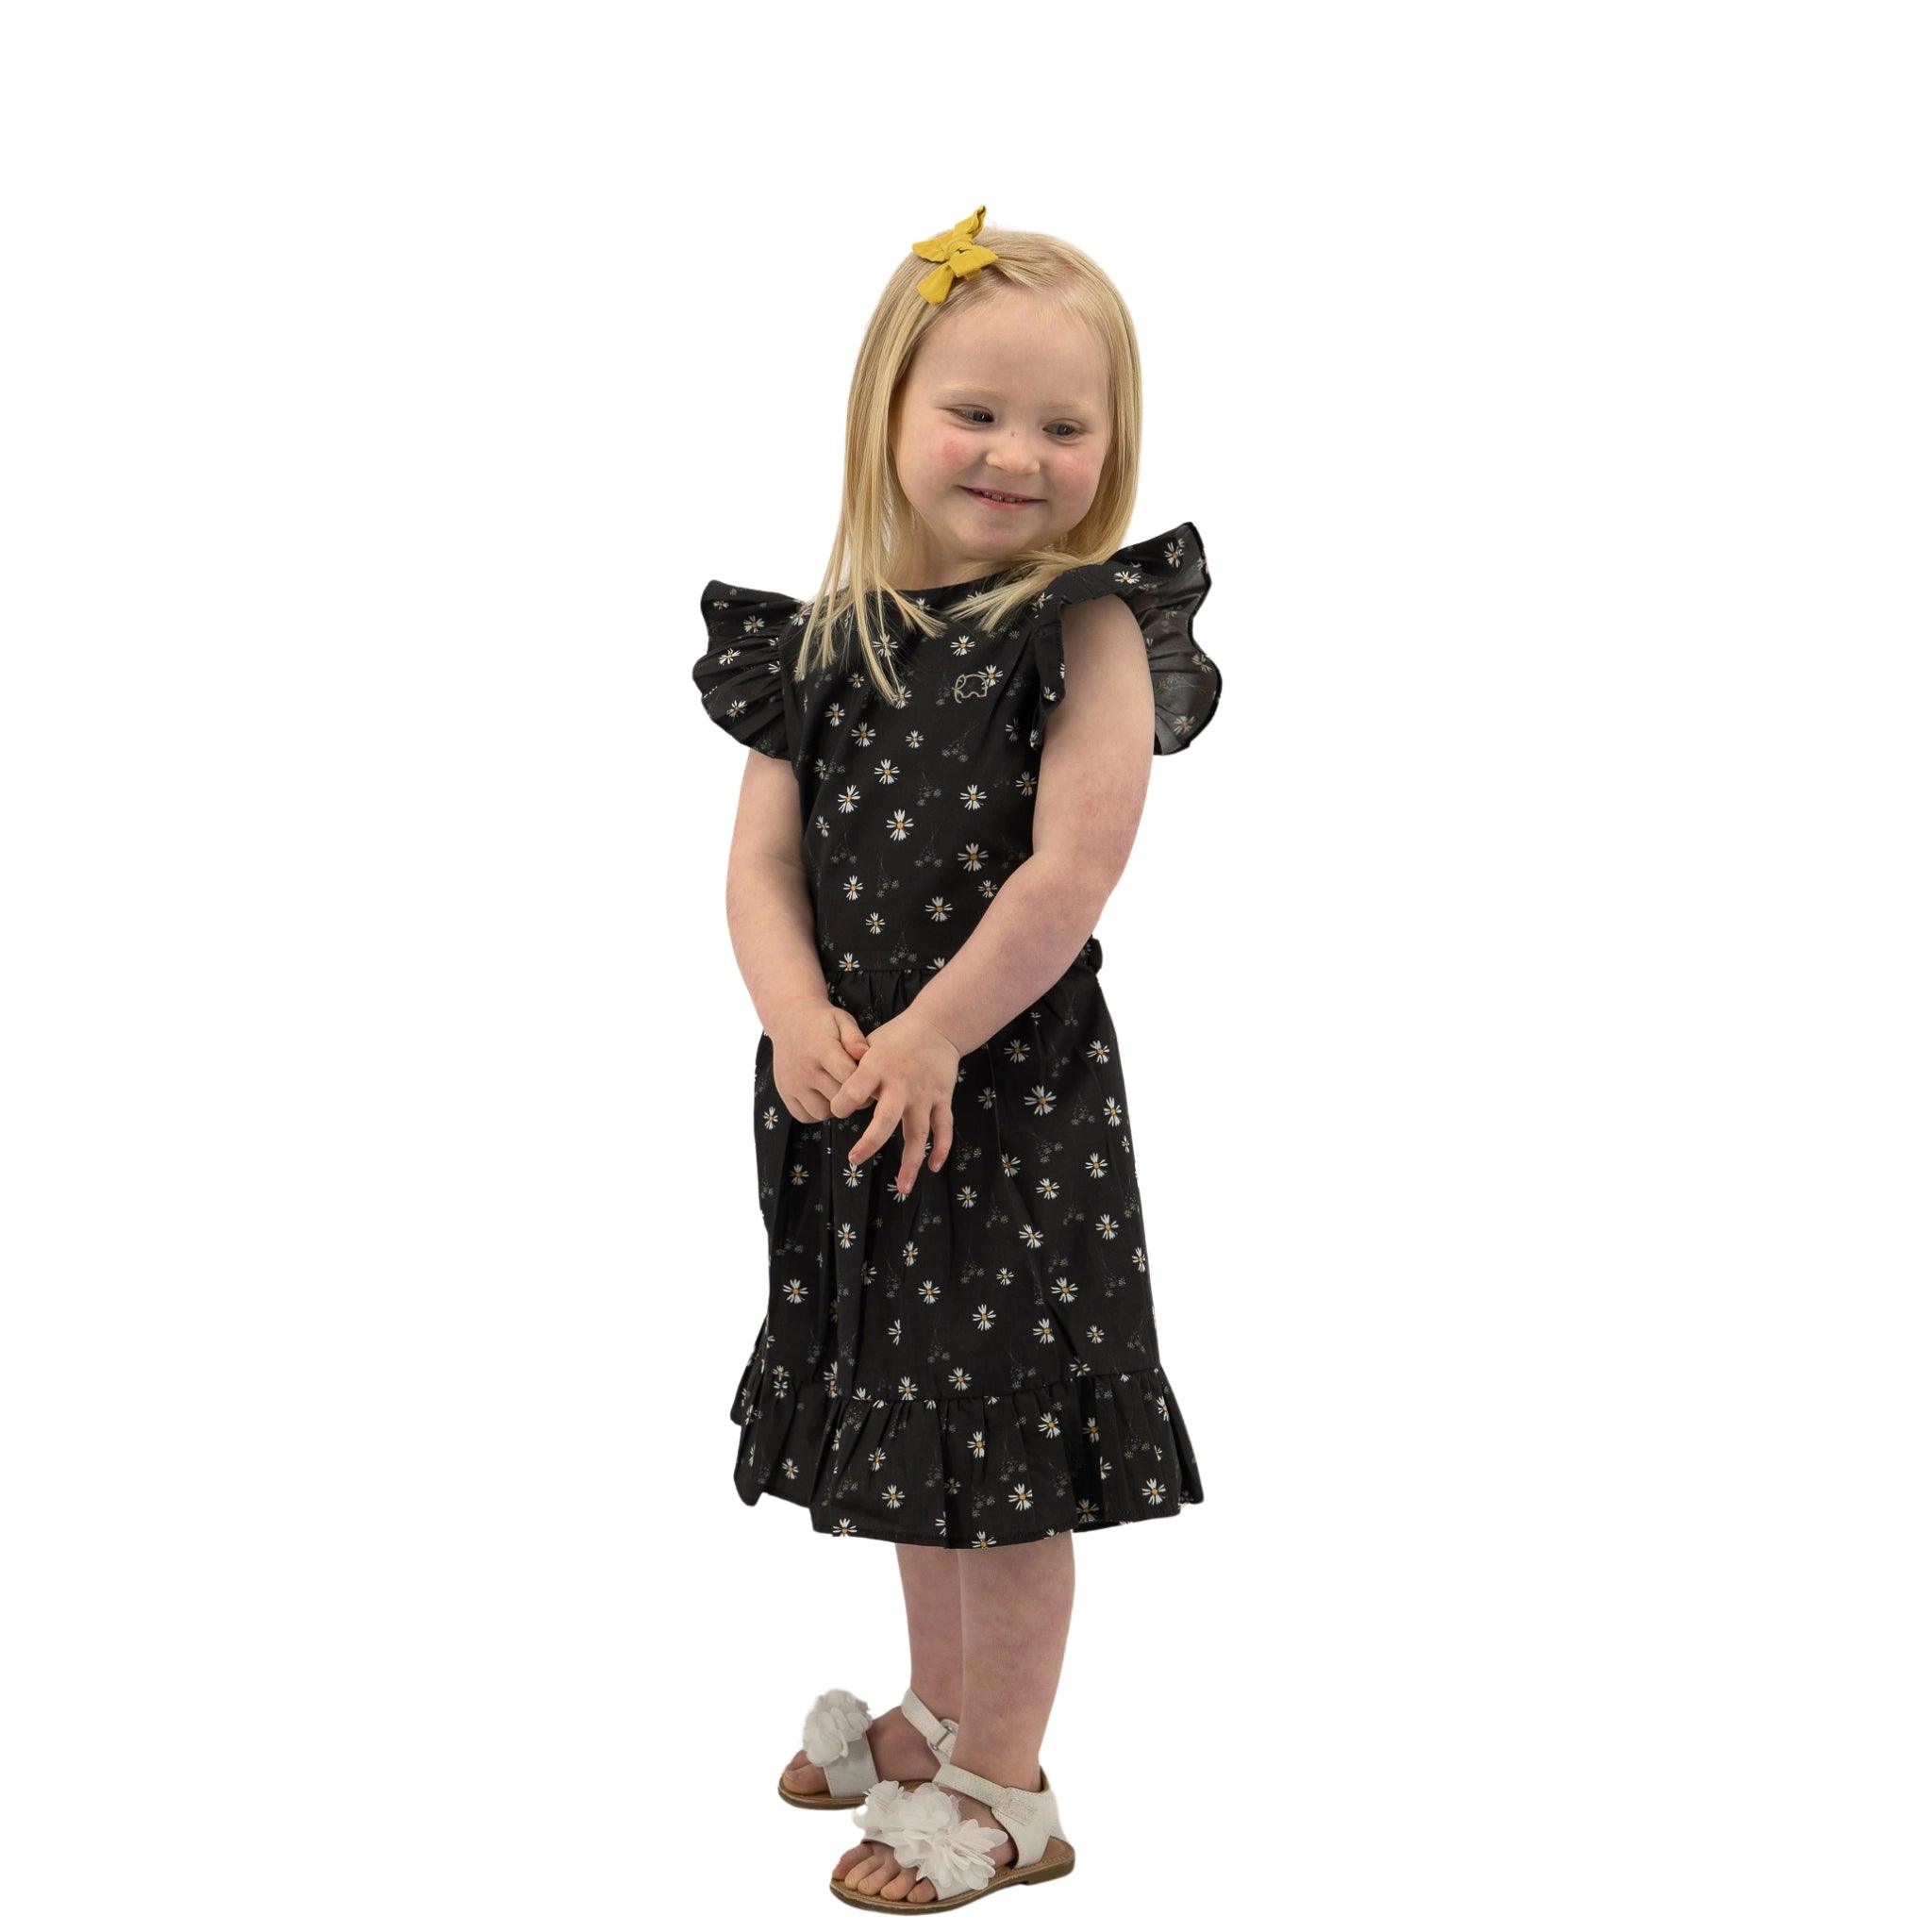 Young girl with blonde hair wearing a Karee Petite Blossom Black Cotton Dress with floral patterns and white sandals, posing with her hands together and smiling.